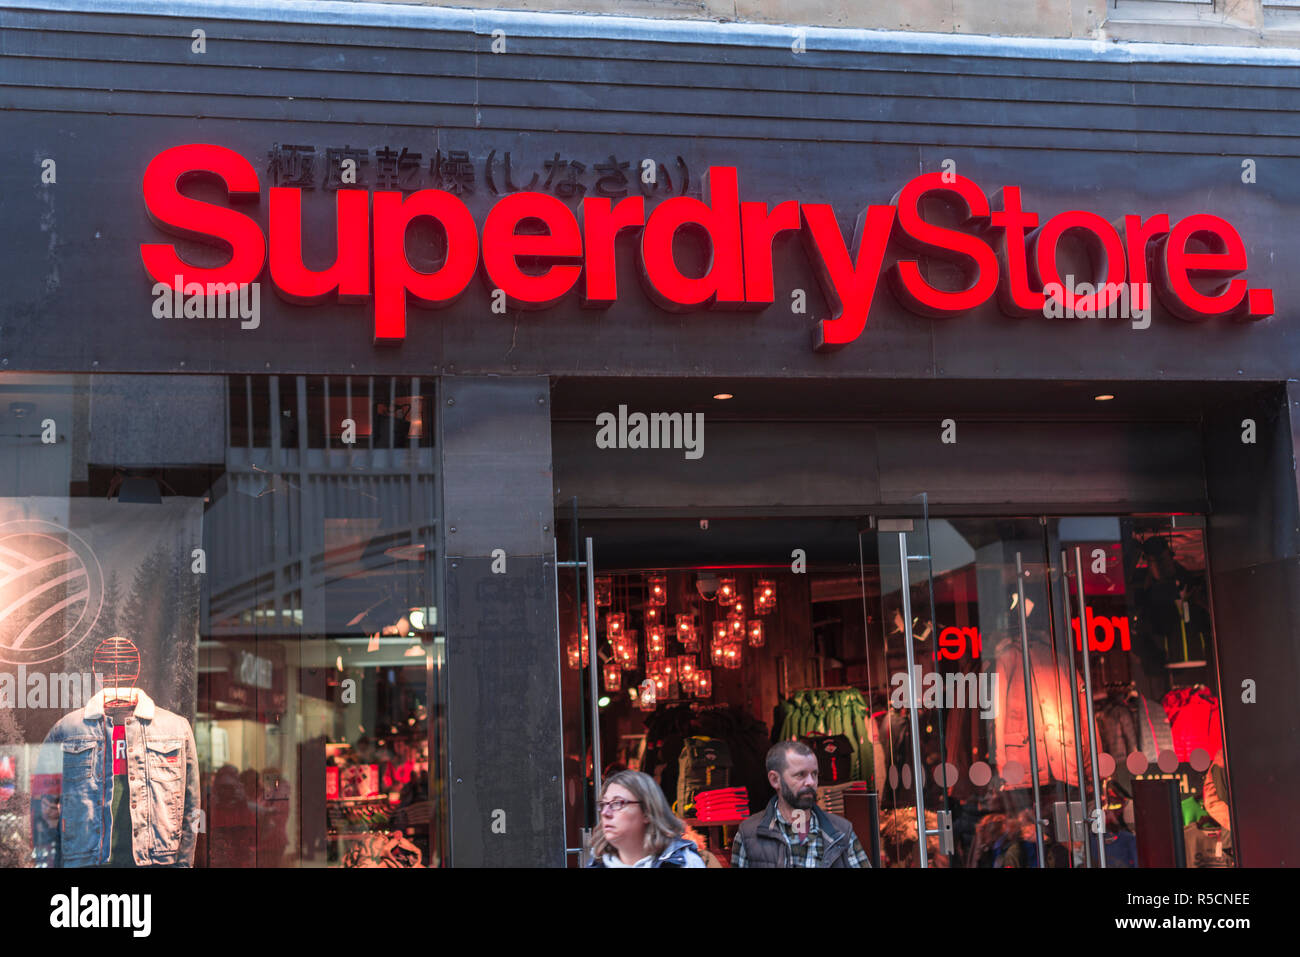 Superdry Store High Resolution Stock Photography and Images - Alamy